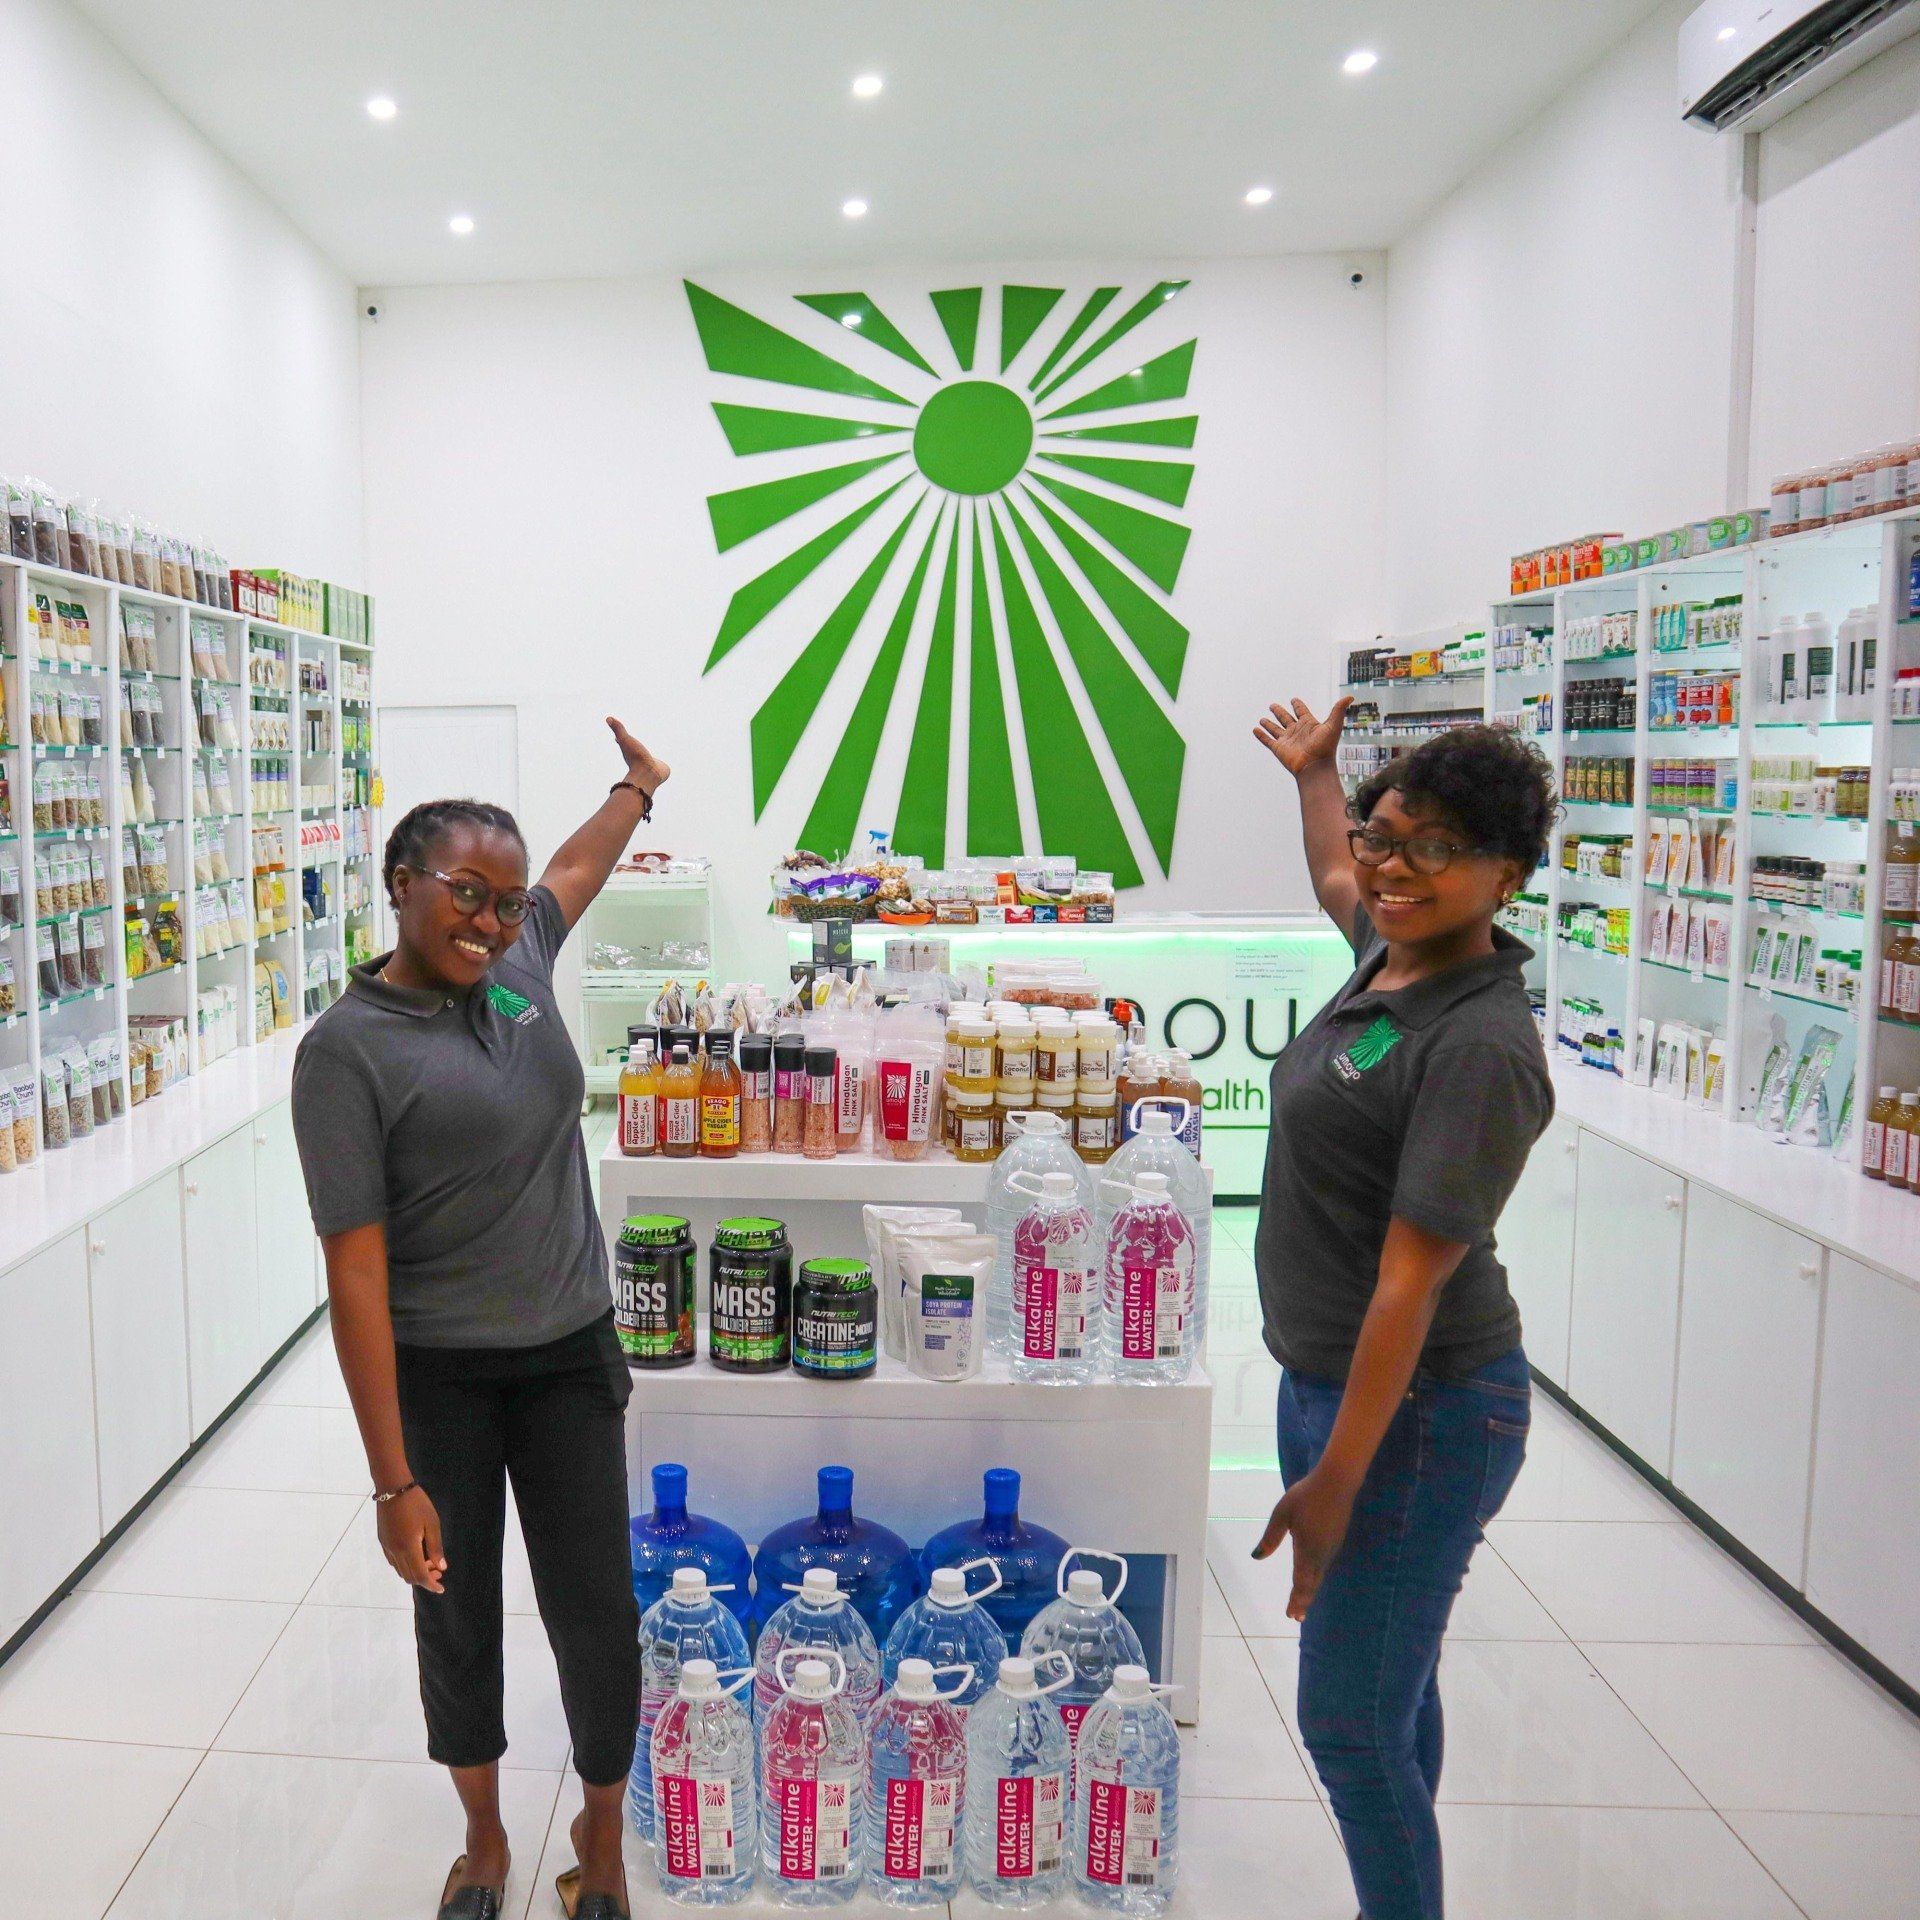 Two women standing in a store with a green sun on the wall